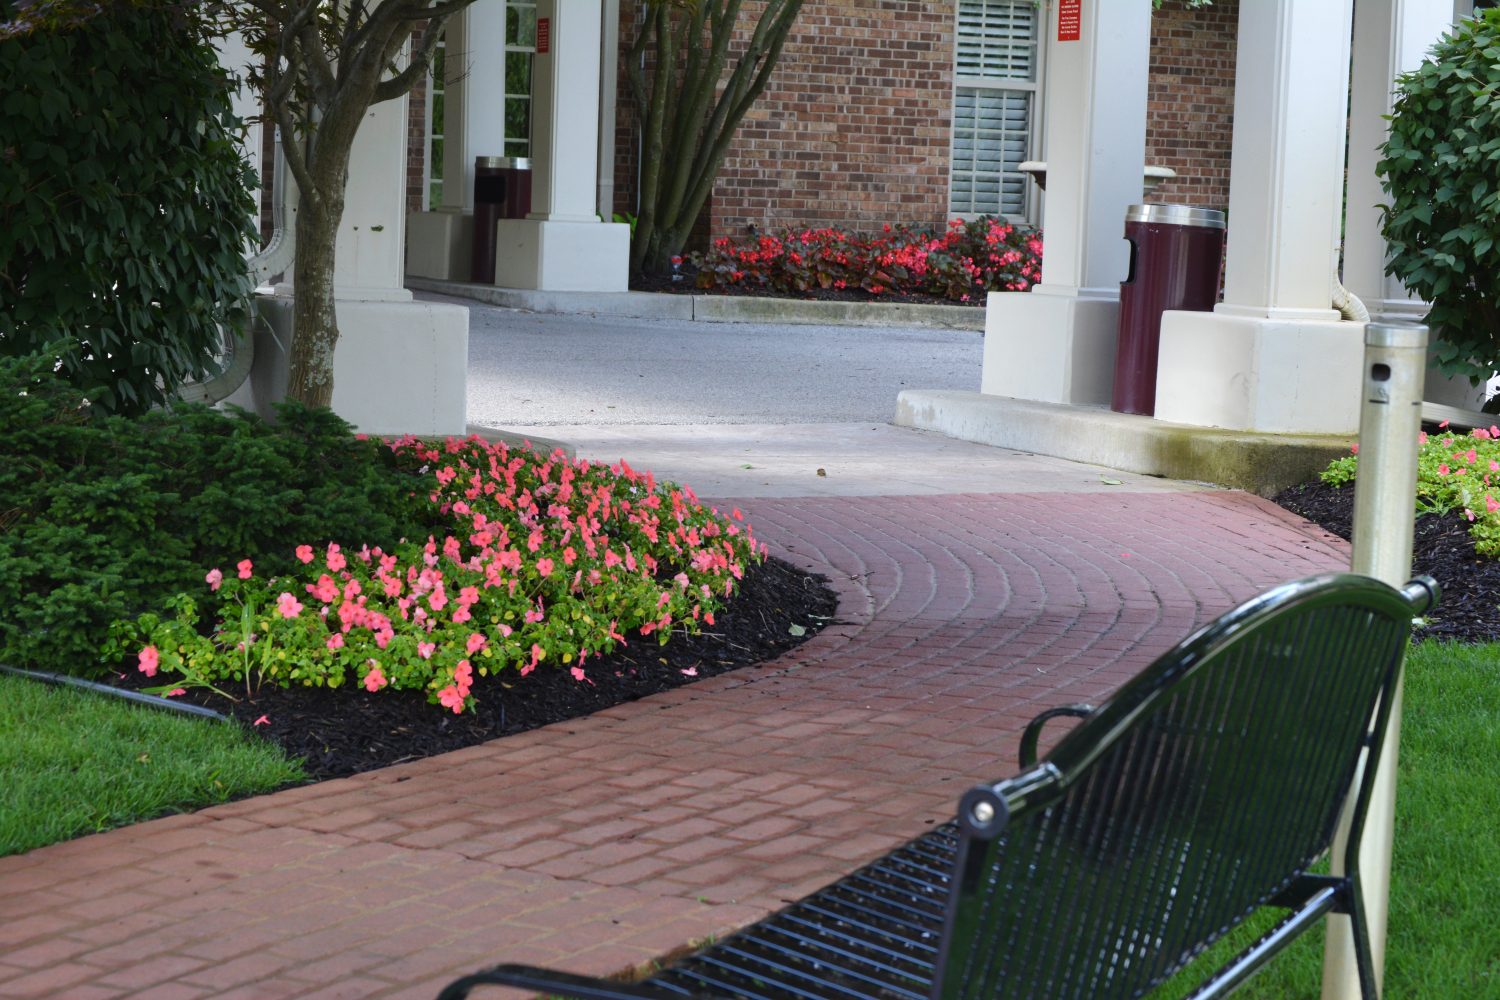 Mulched flower beds lining a brick path